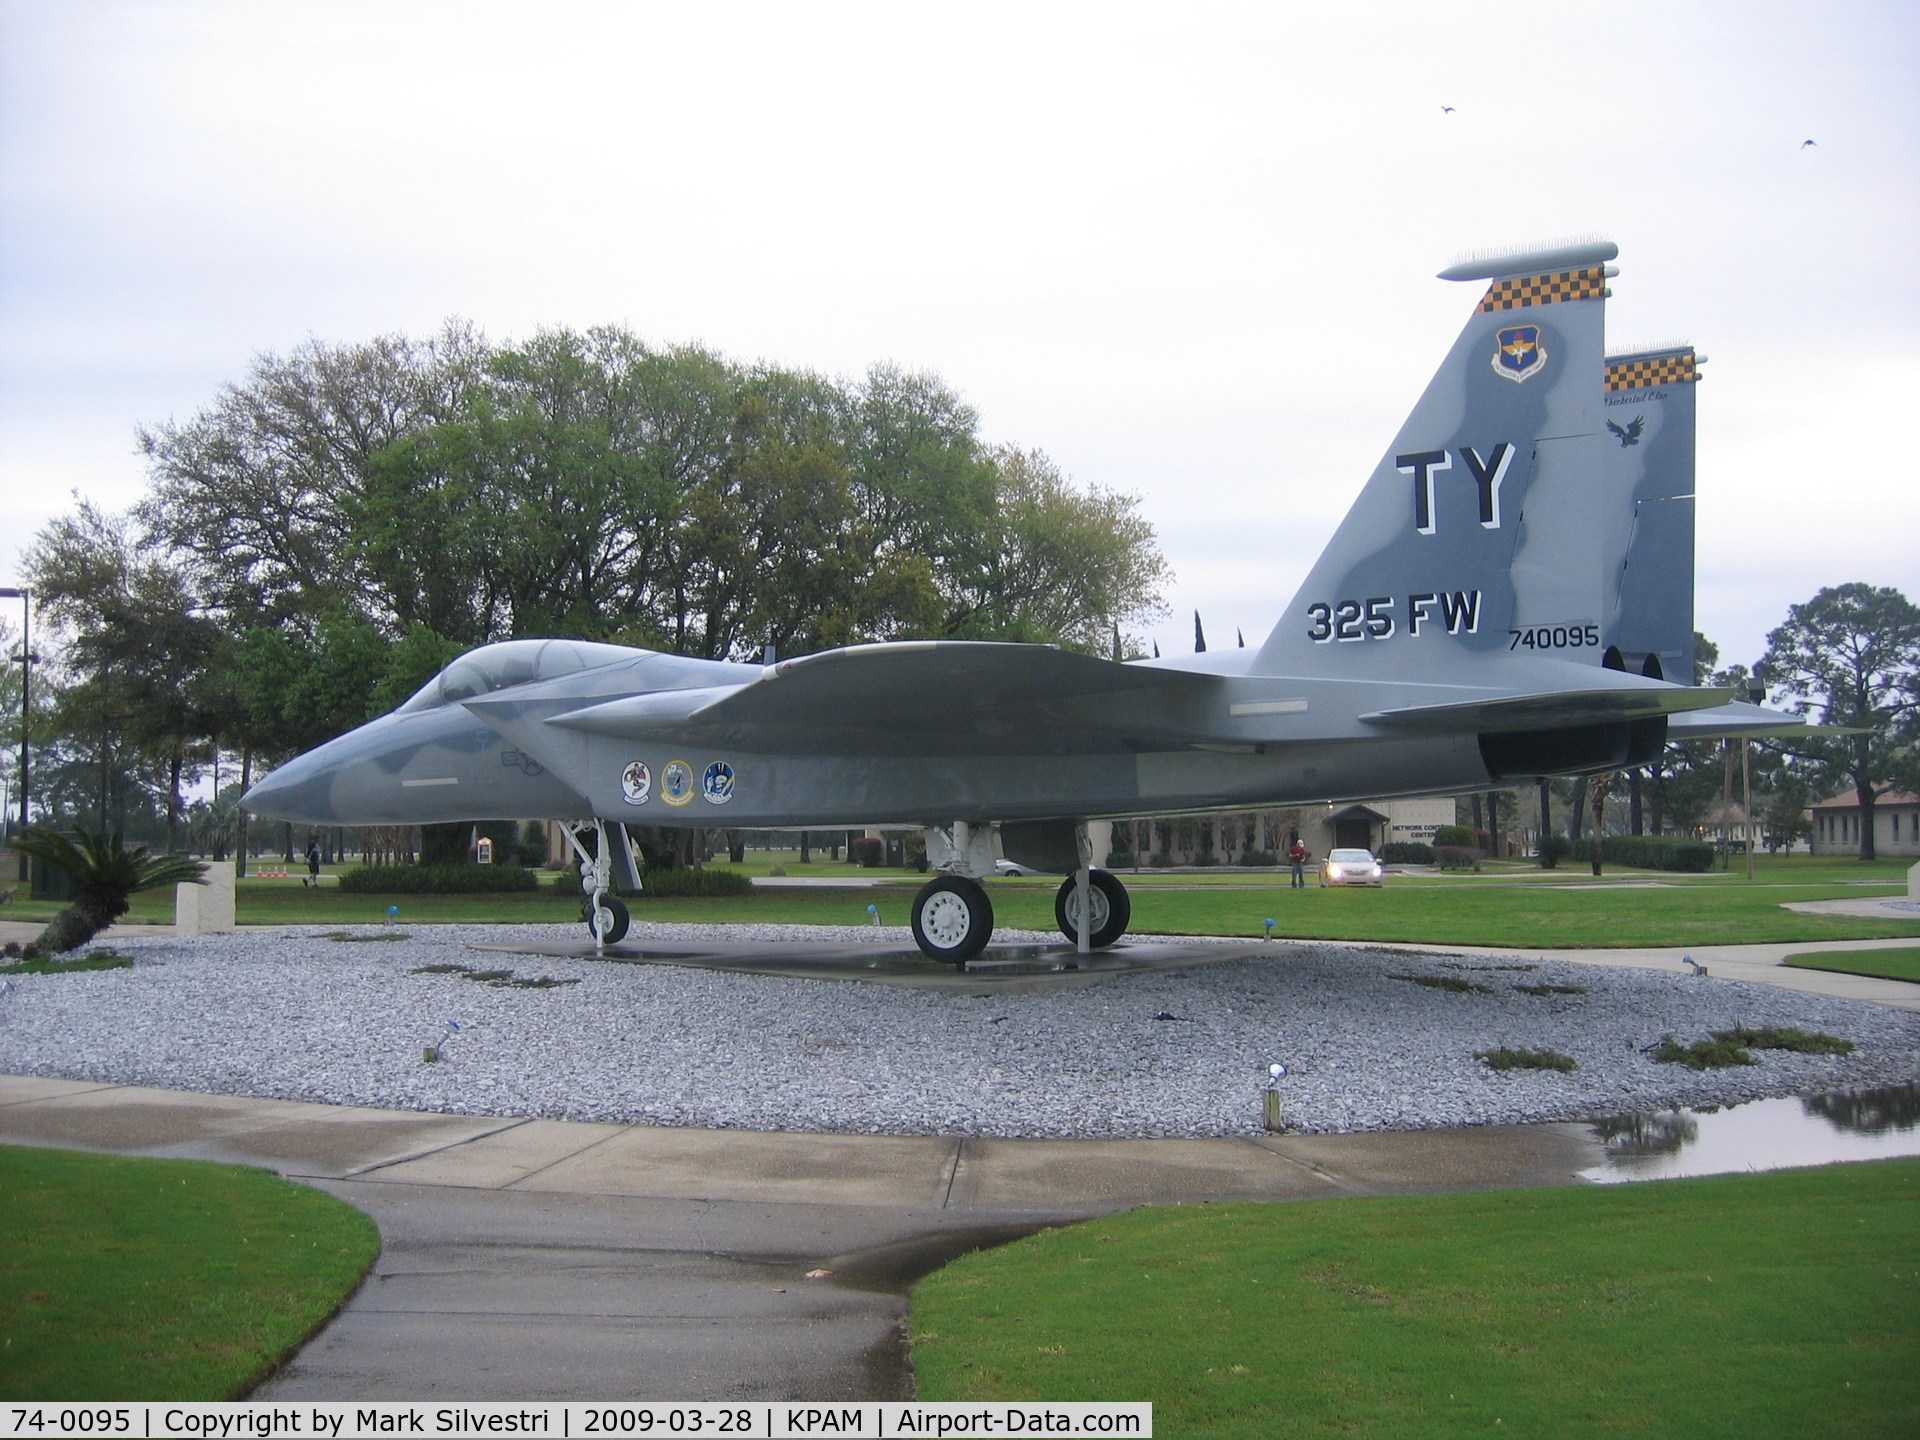 74-0095, 1974 McDonnell Douglas F-15A Eagle C/N 0069/A056, On Display at Tyndall AFB